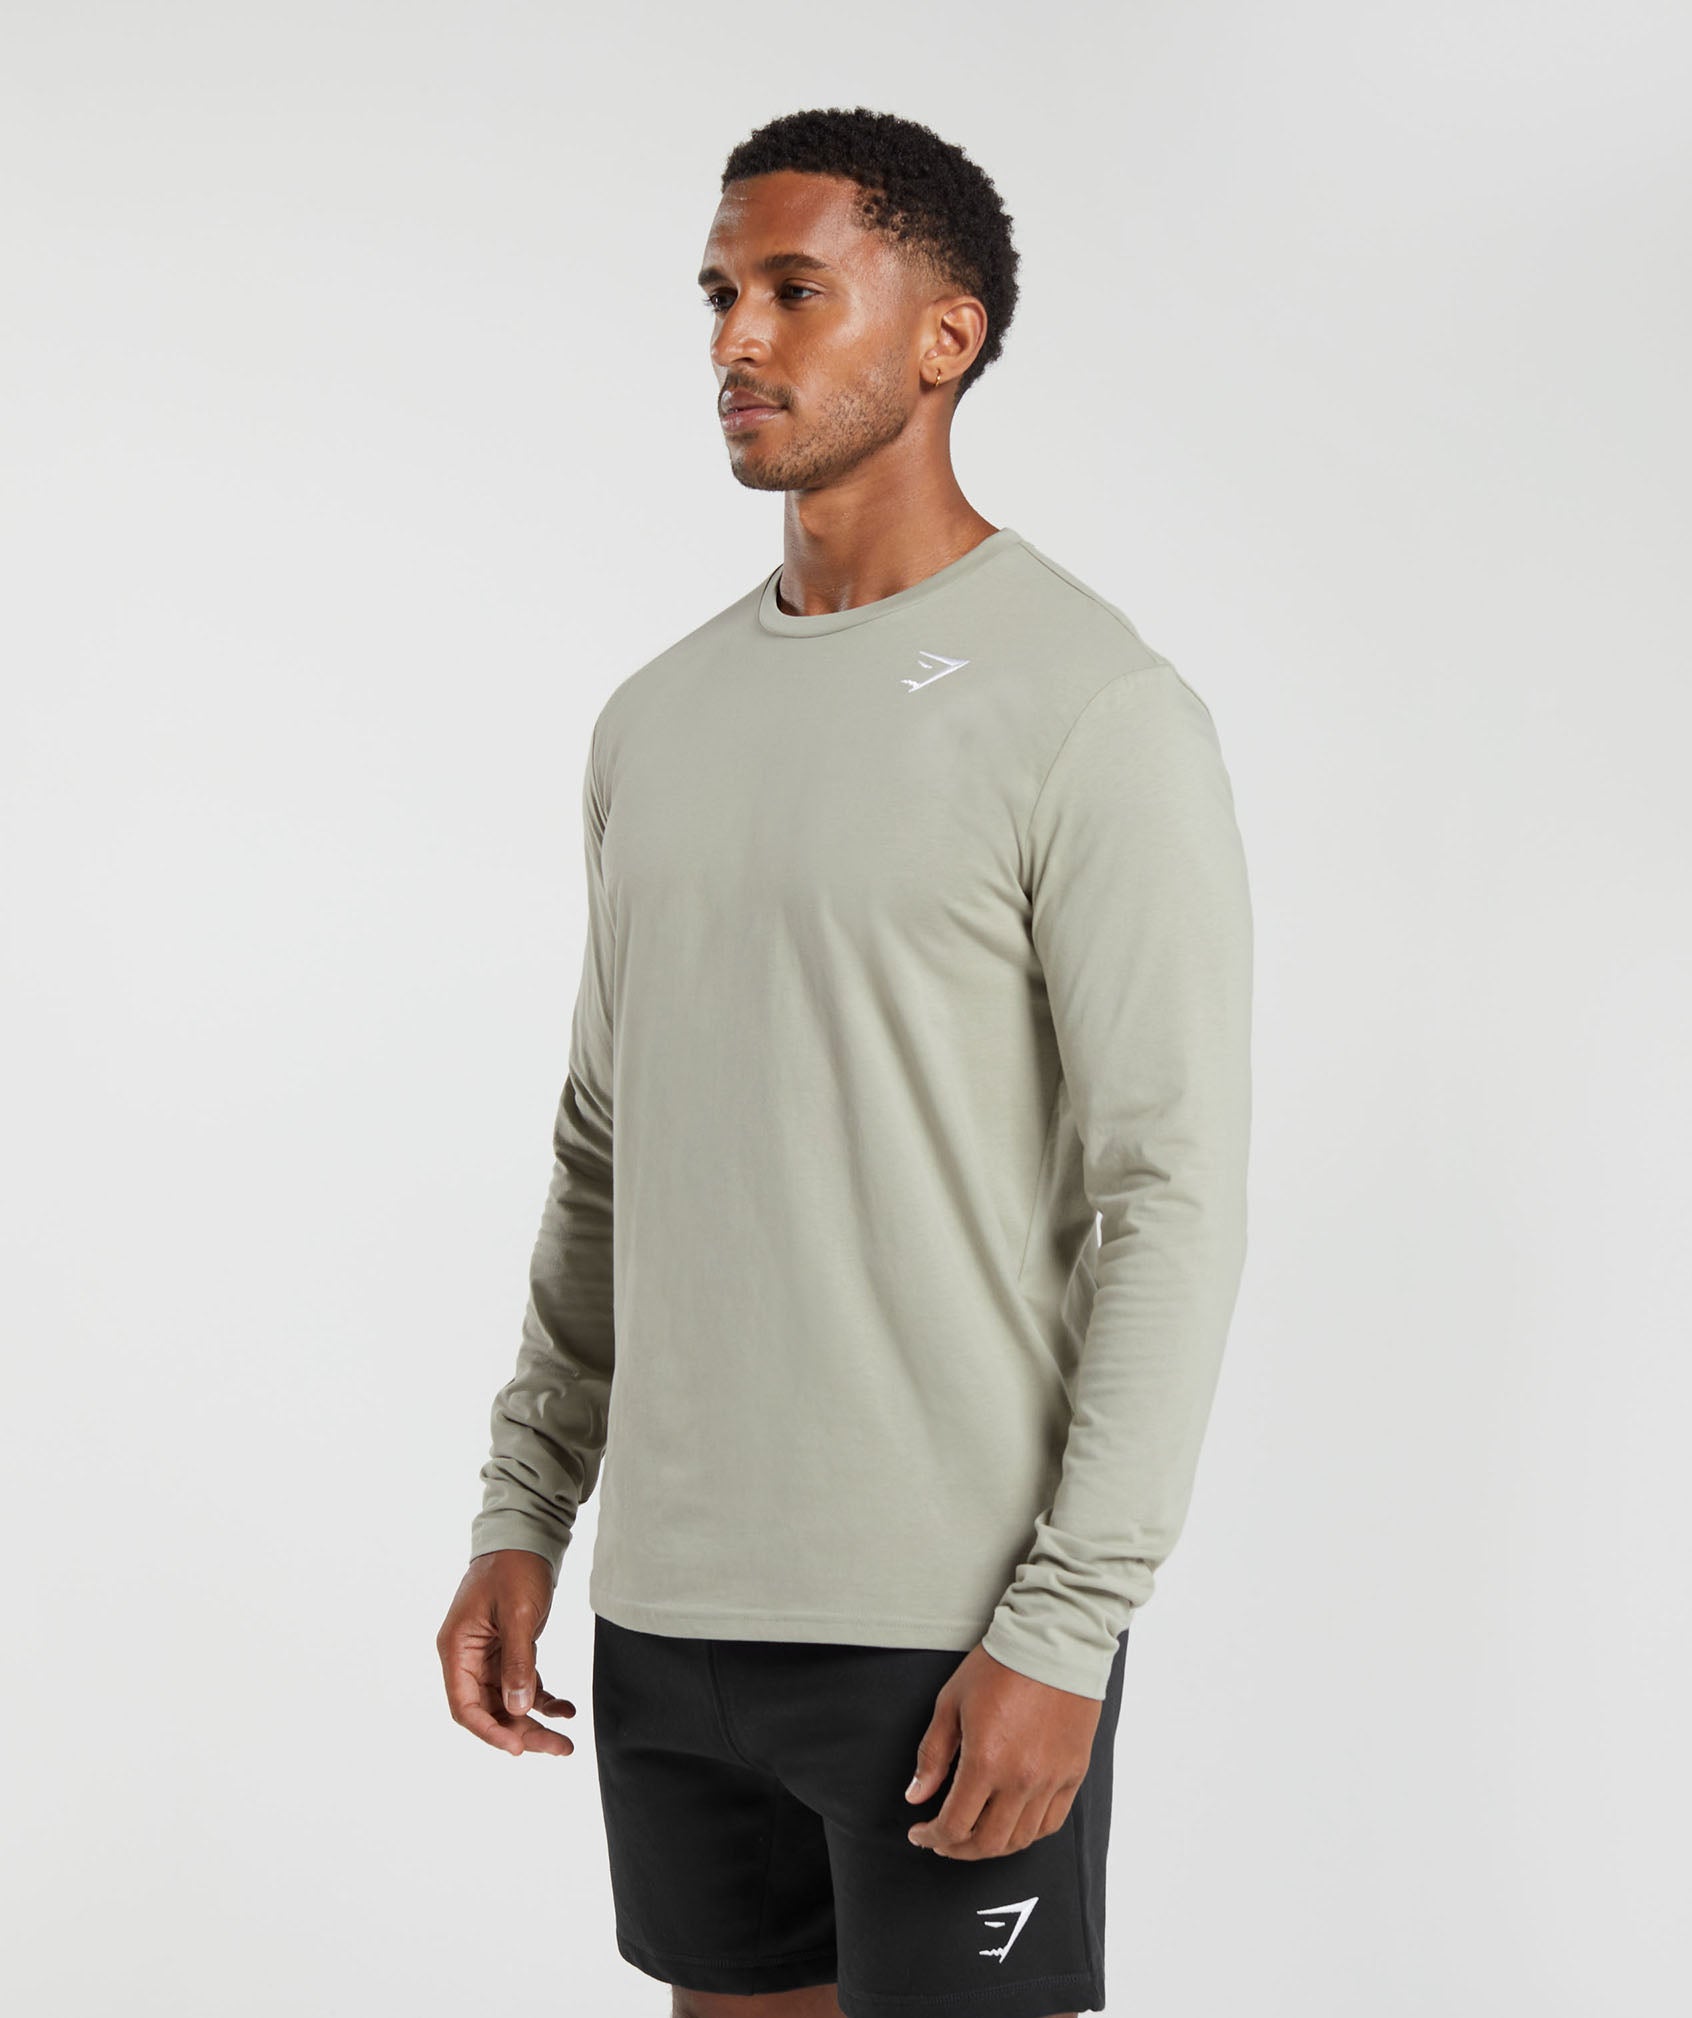 Crest Long Sleeve T-Shirt in Stone Grey - view 3